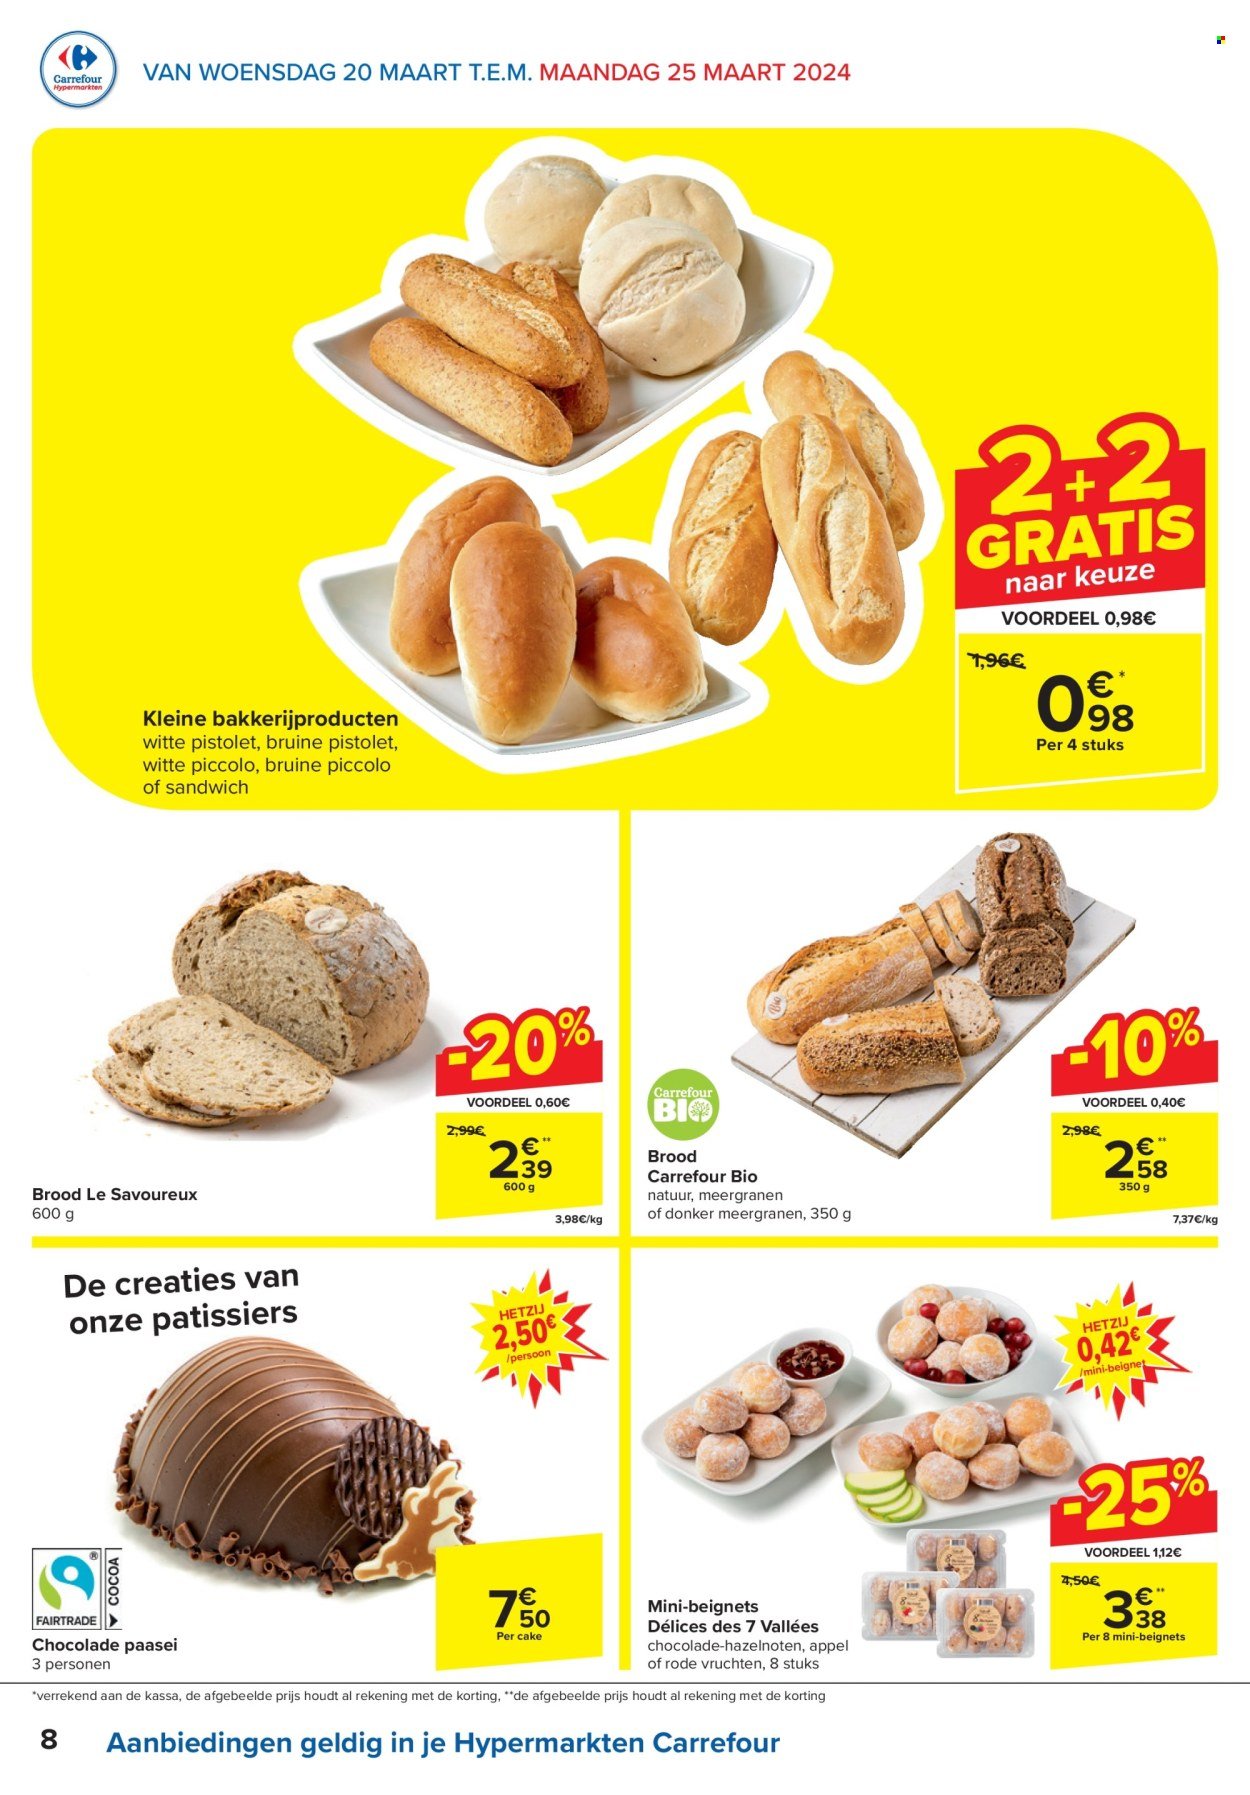 Catalogue Carrefour hypermarkt - 20.3.2024 - 2.4.2024. Page 8.